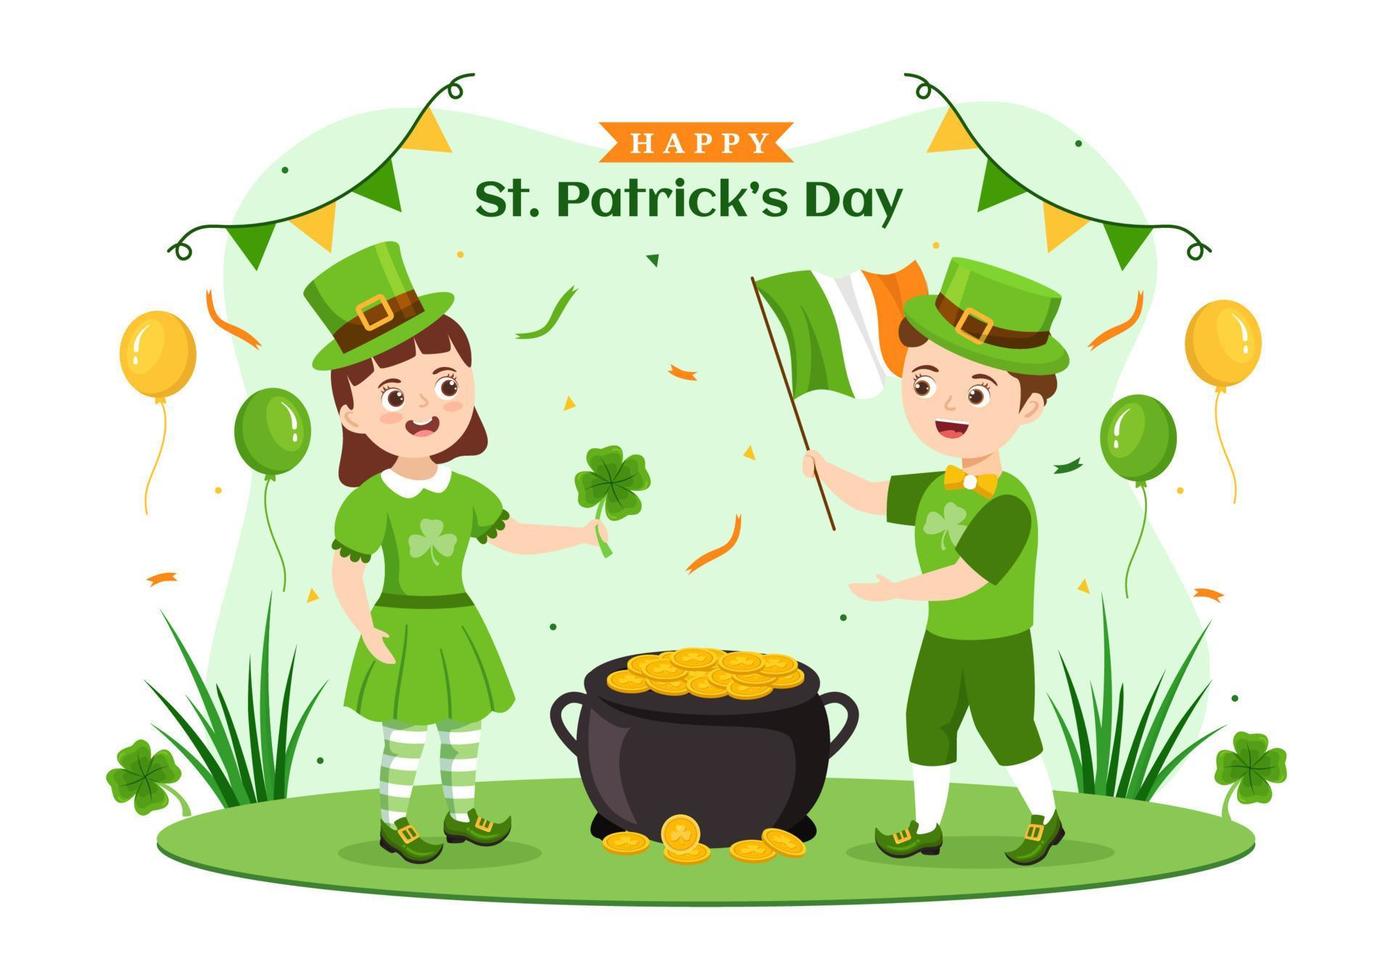 Happy St Patricks Day Illustration with Kids, Golden Coins, Green Hat, Leprechauns and Shamrock in Flat Cartoon Hand Drawn for Landing Page Templates vector